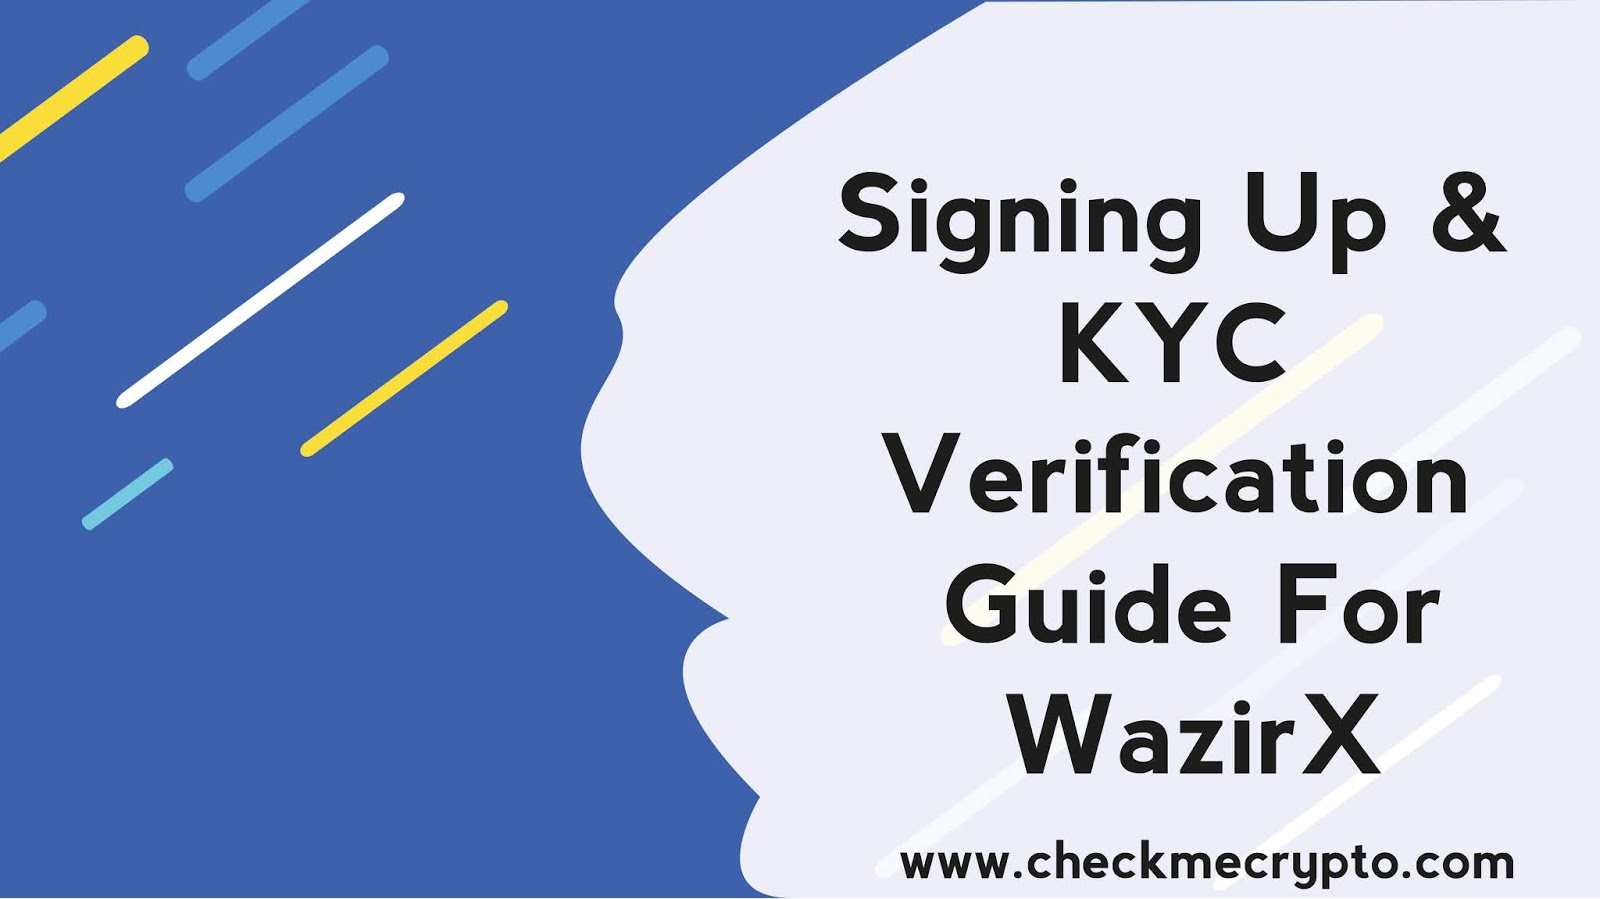 Signing Up & KYC Verification Guide in WazirX App